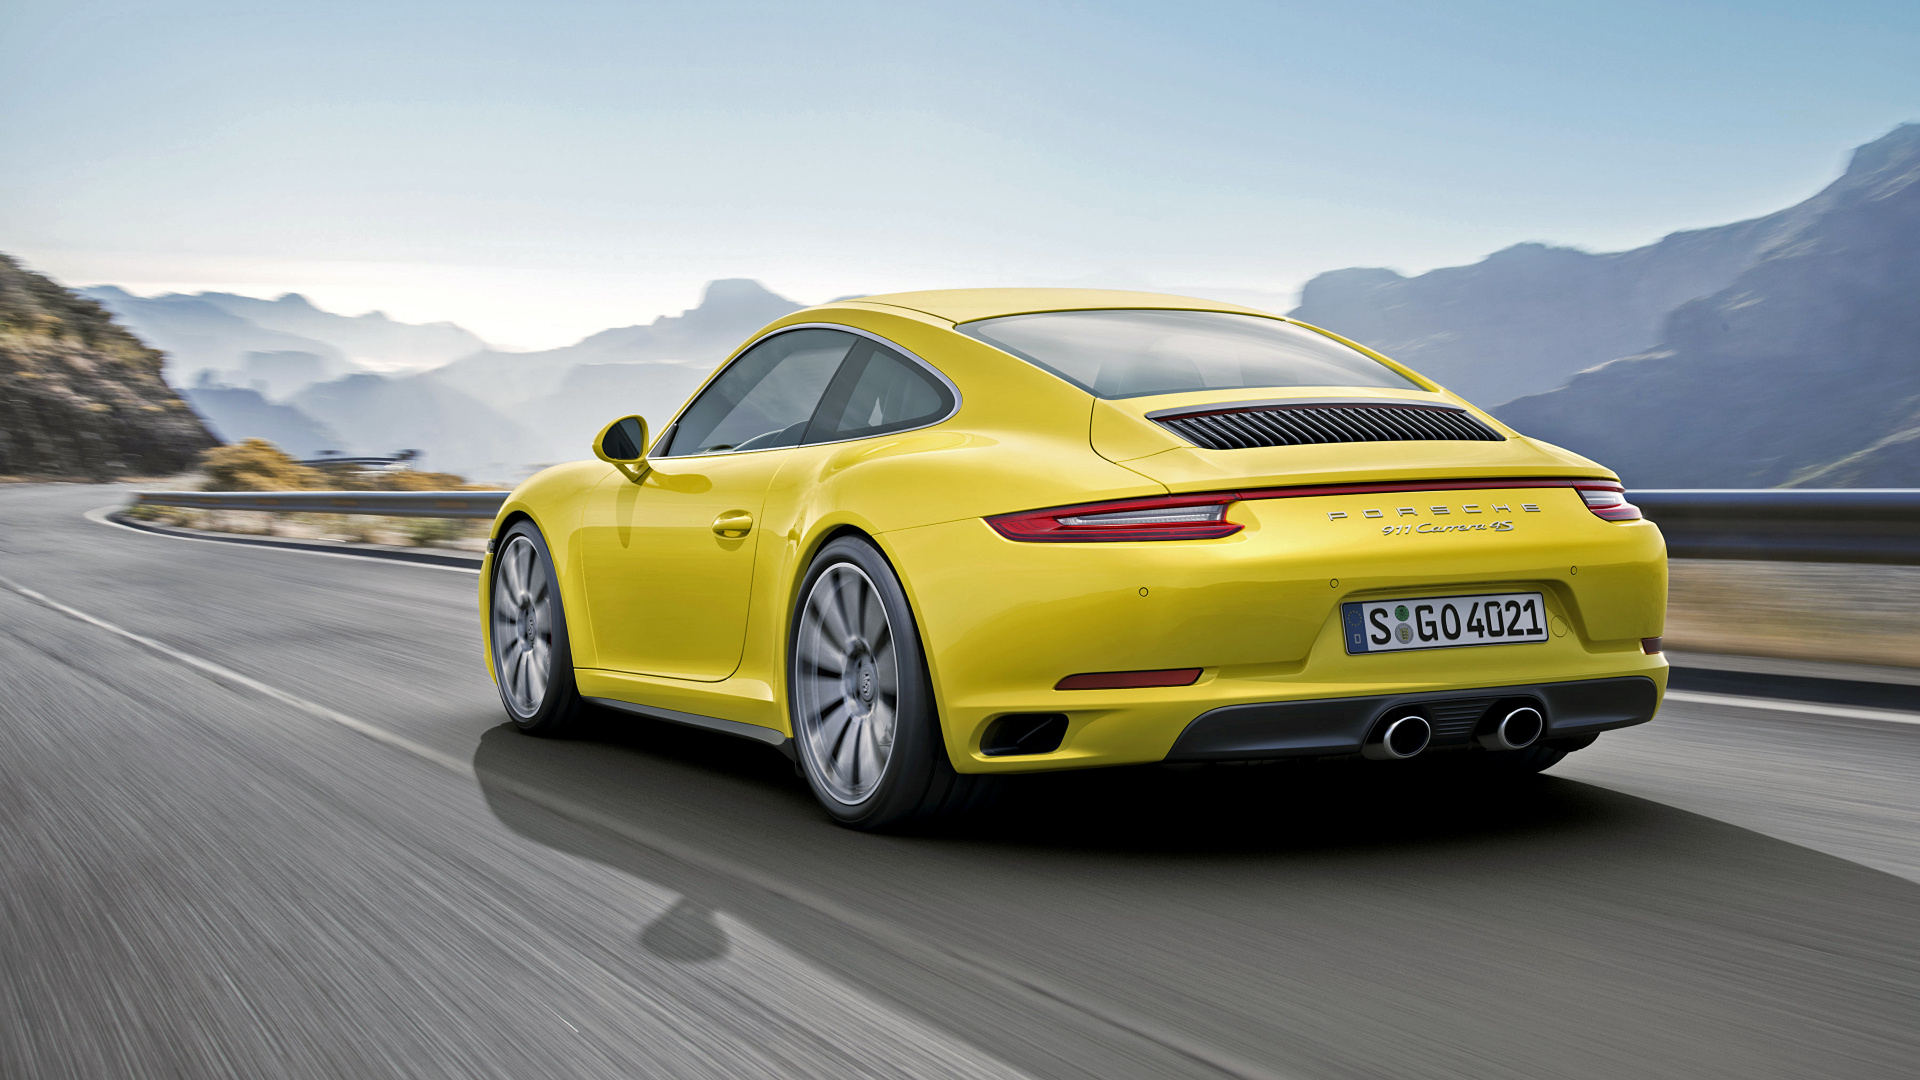 Yellow Porsche 911 on Road During Daytime. Wallpaper in 1920x1080 Resolution